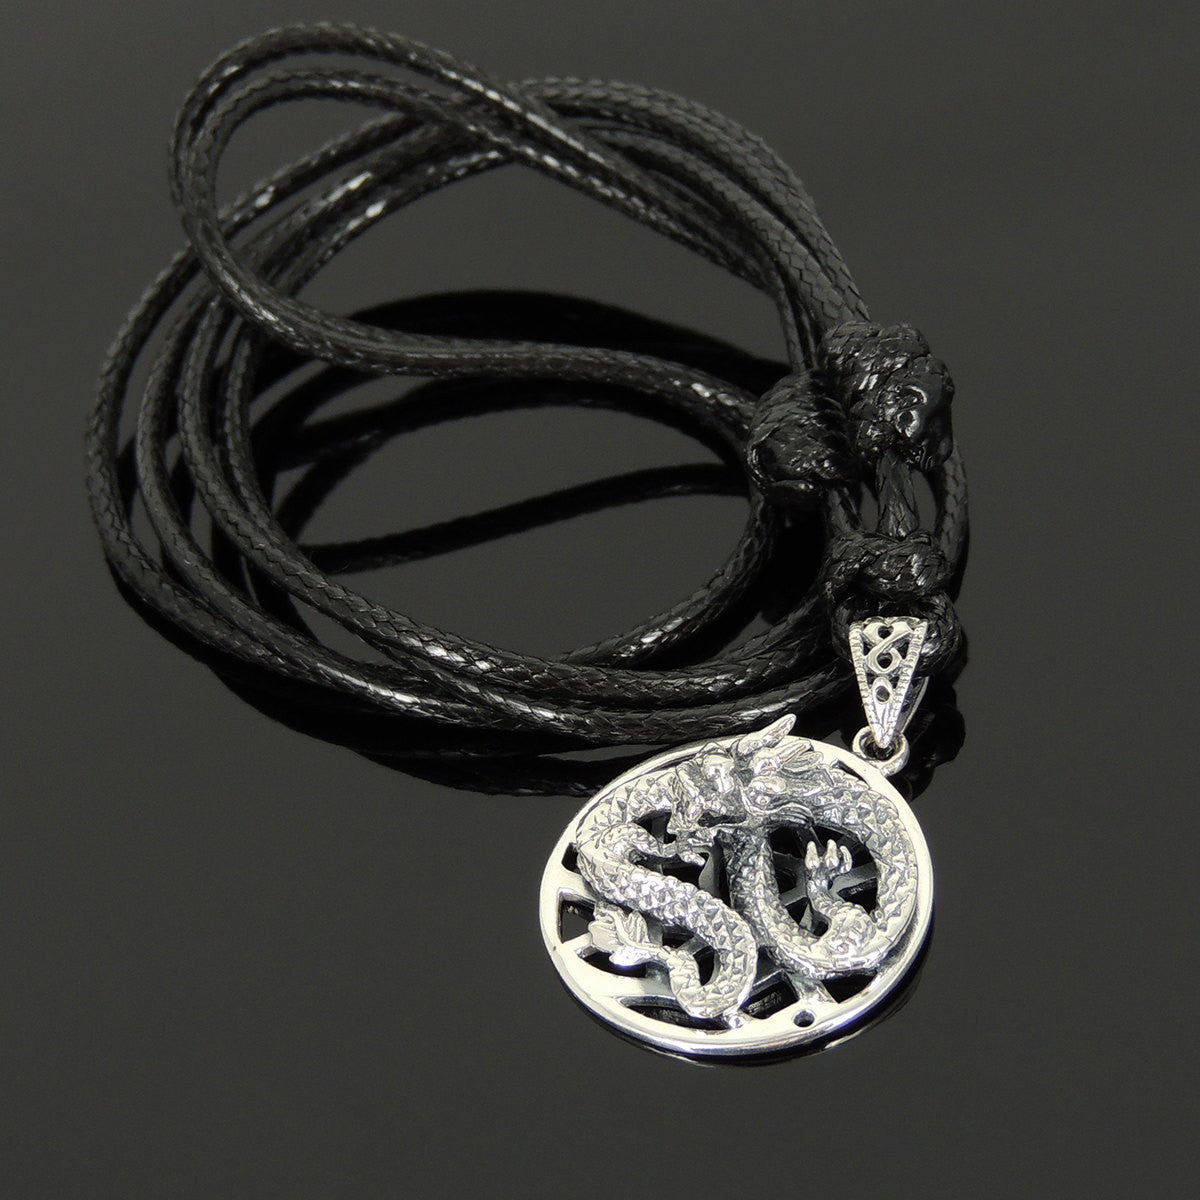 Adjustable Wax Rope Necklace with S925 Sterling Silver 3D Dragon Pendant - Handmade by Gem & Silver NK161